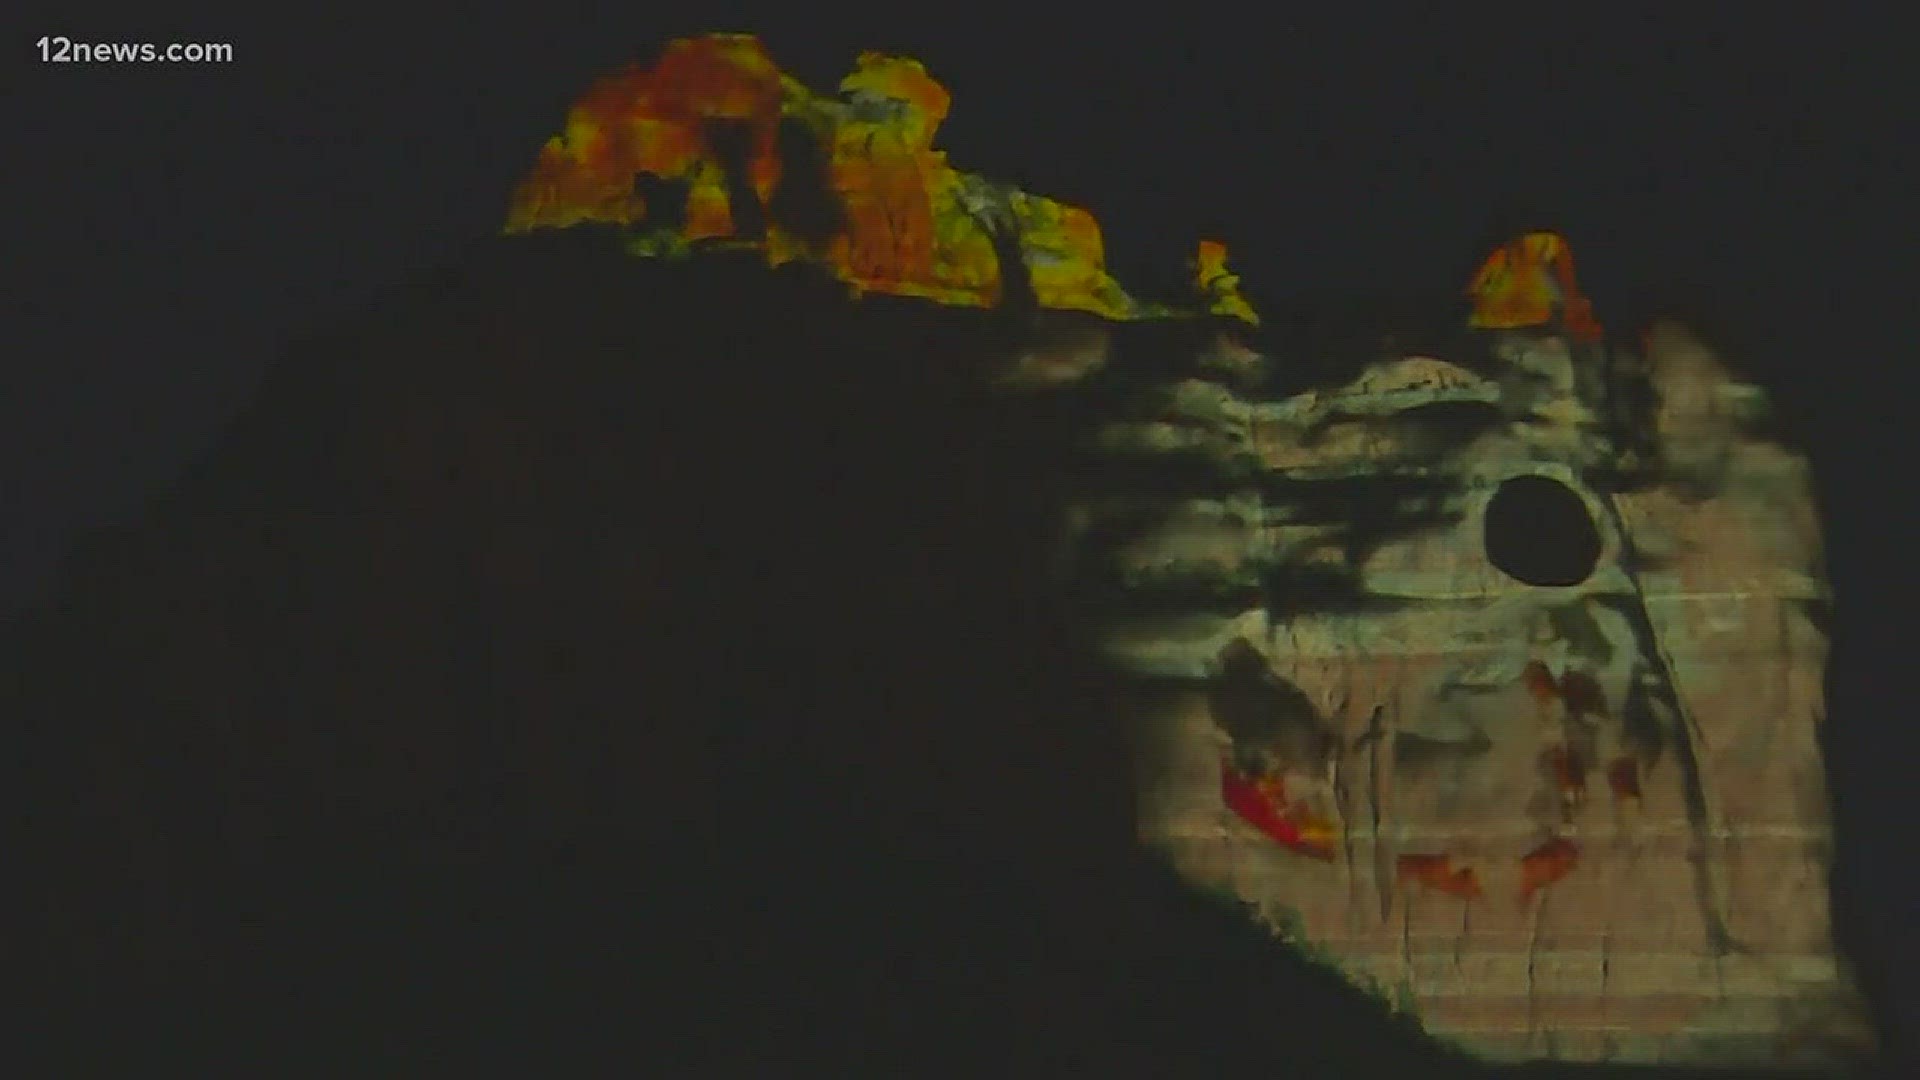 The show in Sedona was projected onto the iconic red rocks of Northern Arizona.